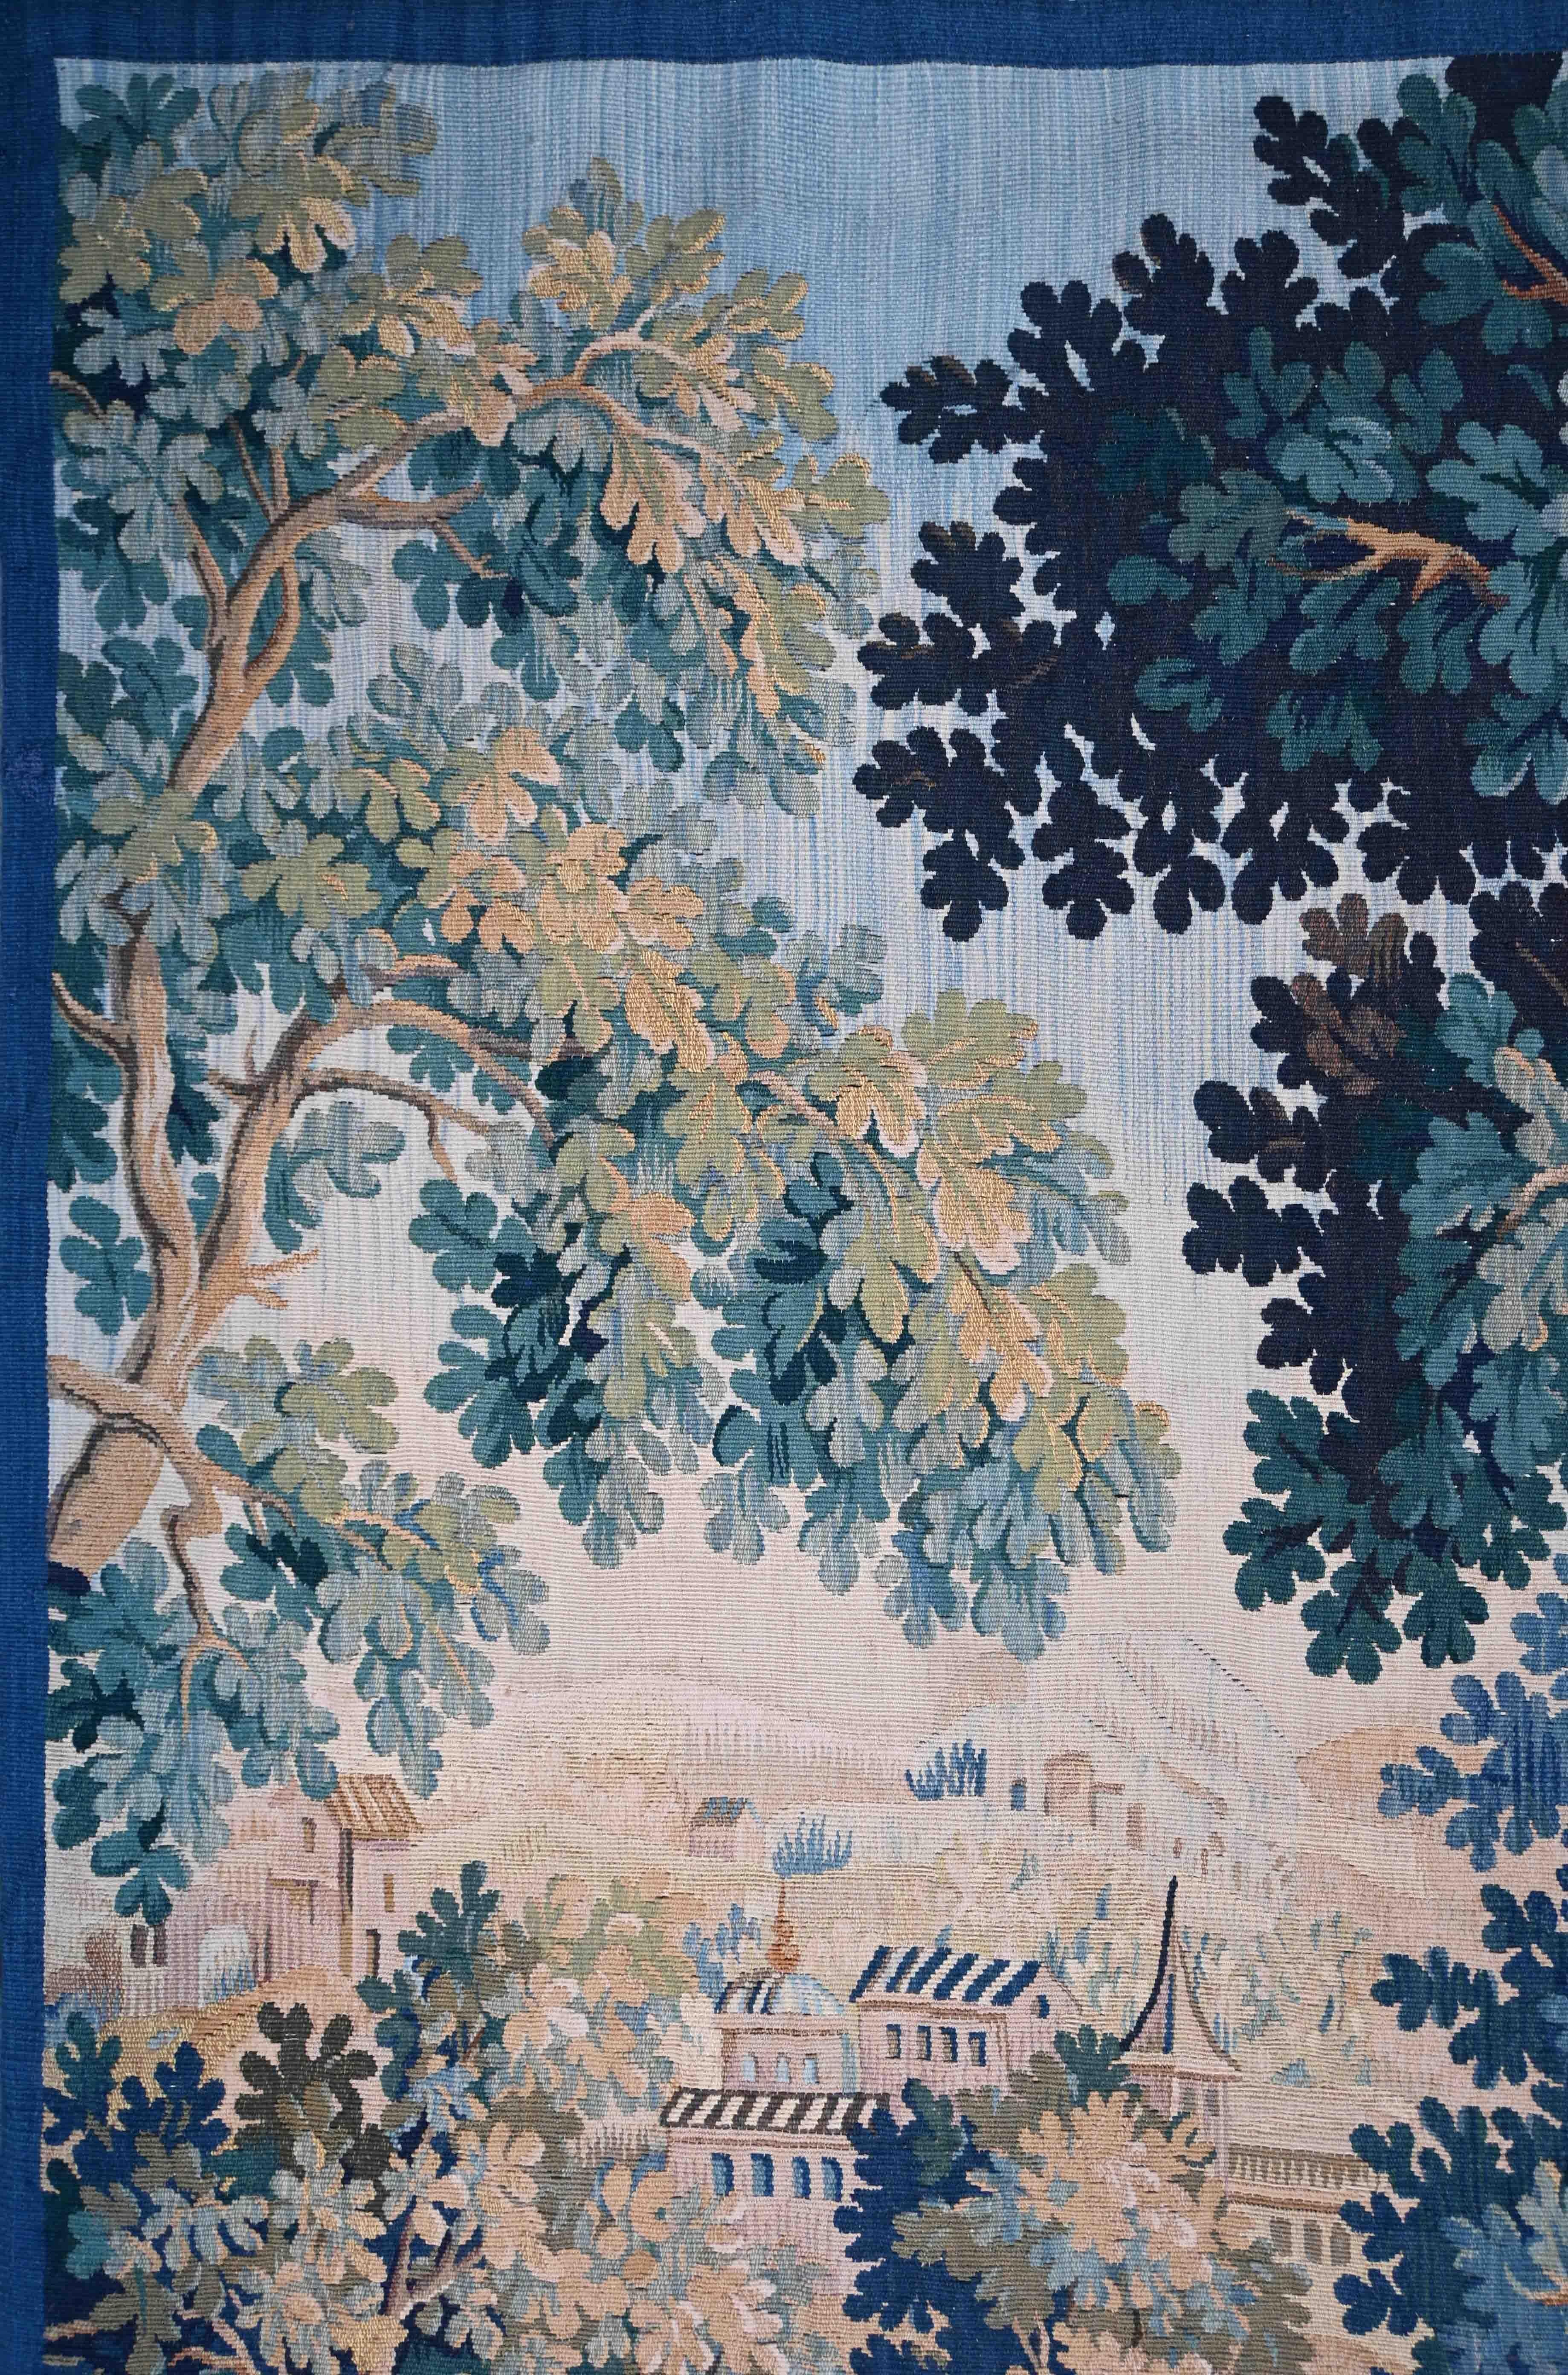 Hand-Woven French Aubusson Tapestry Greenery 19th century - 1m92x1m50 - No. 1365